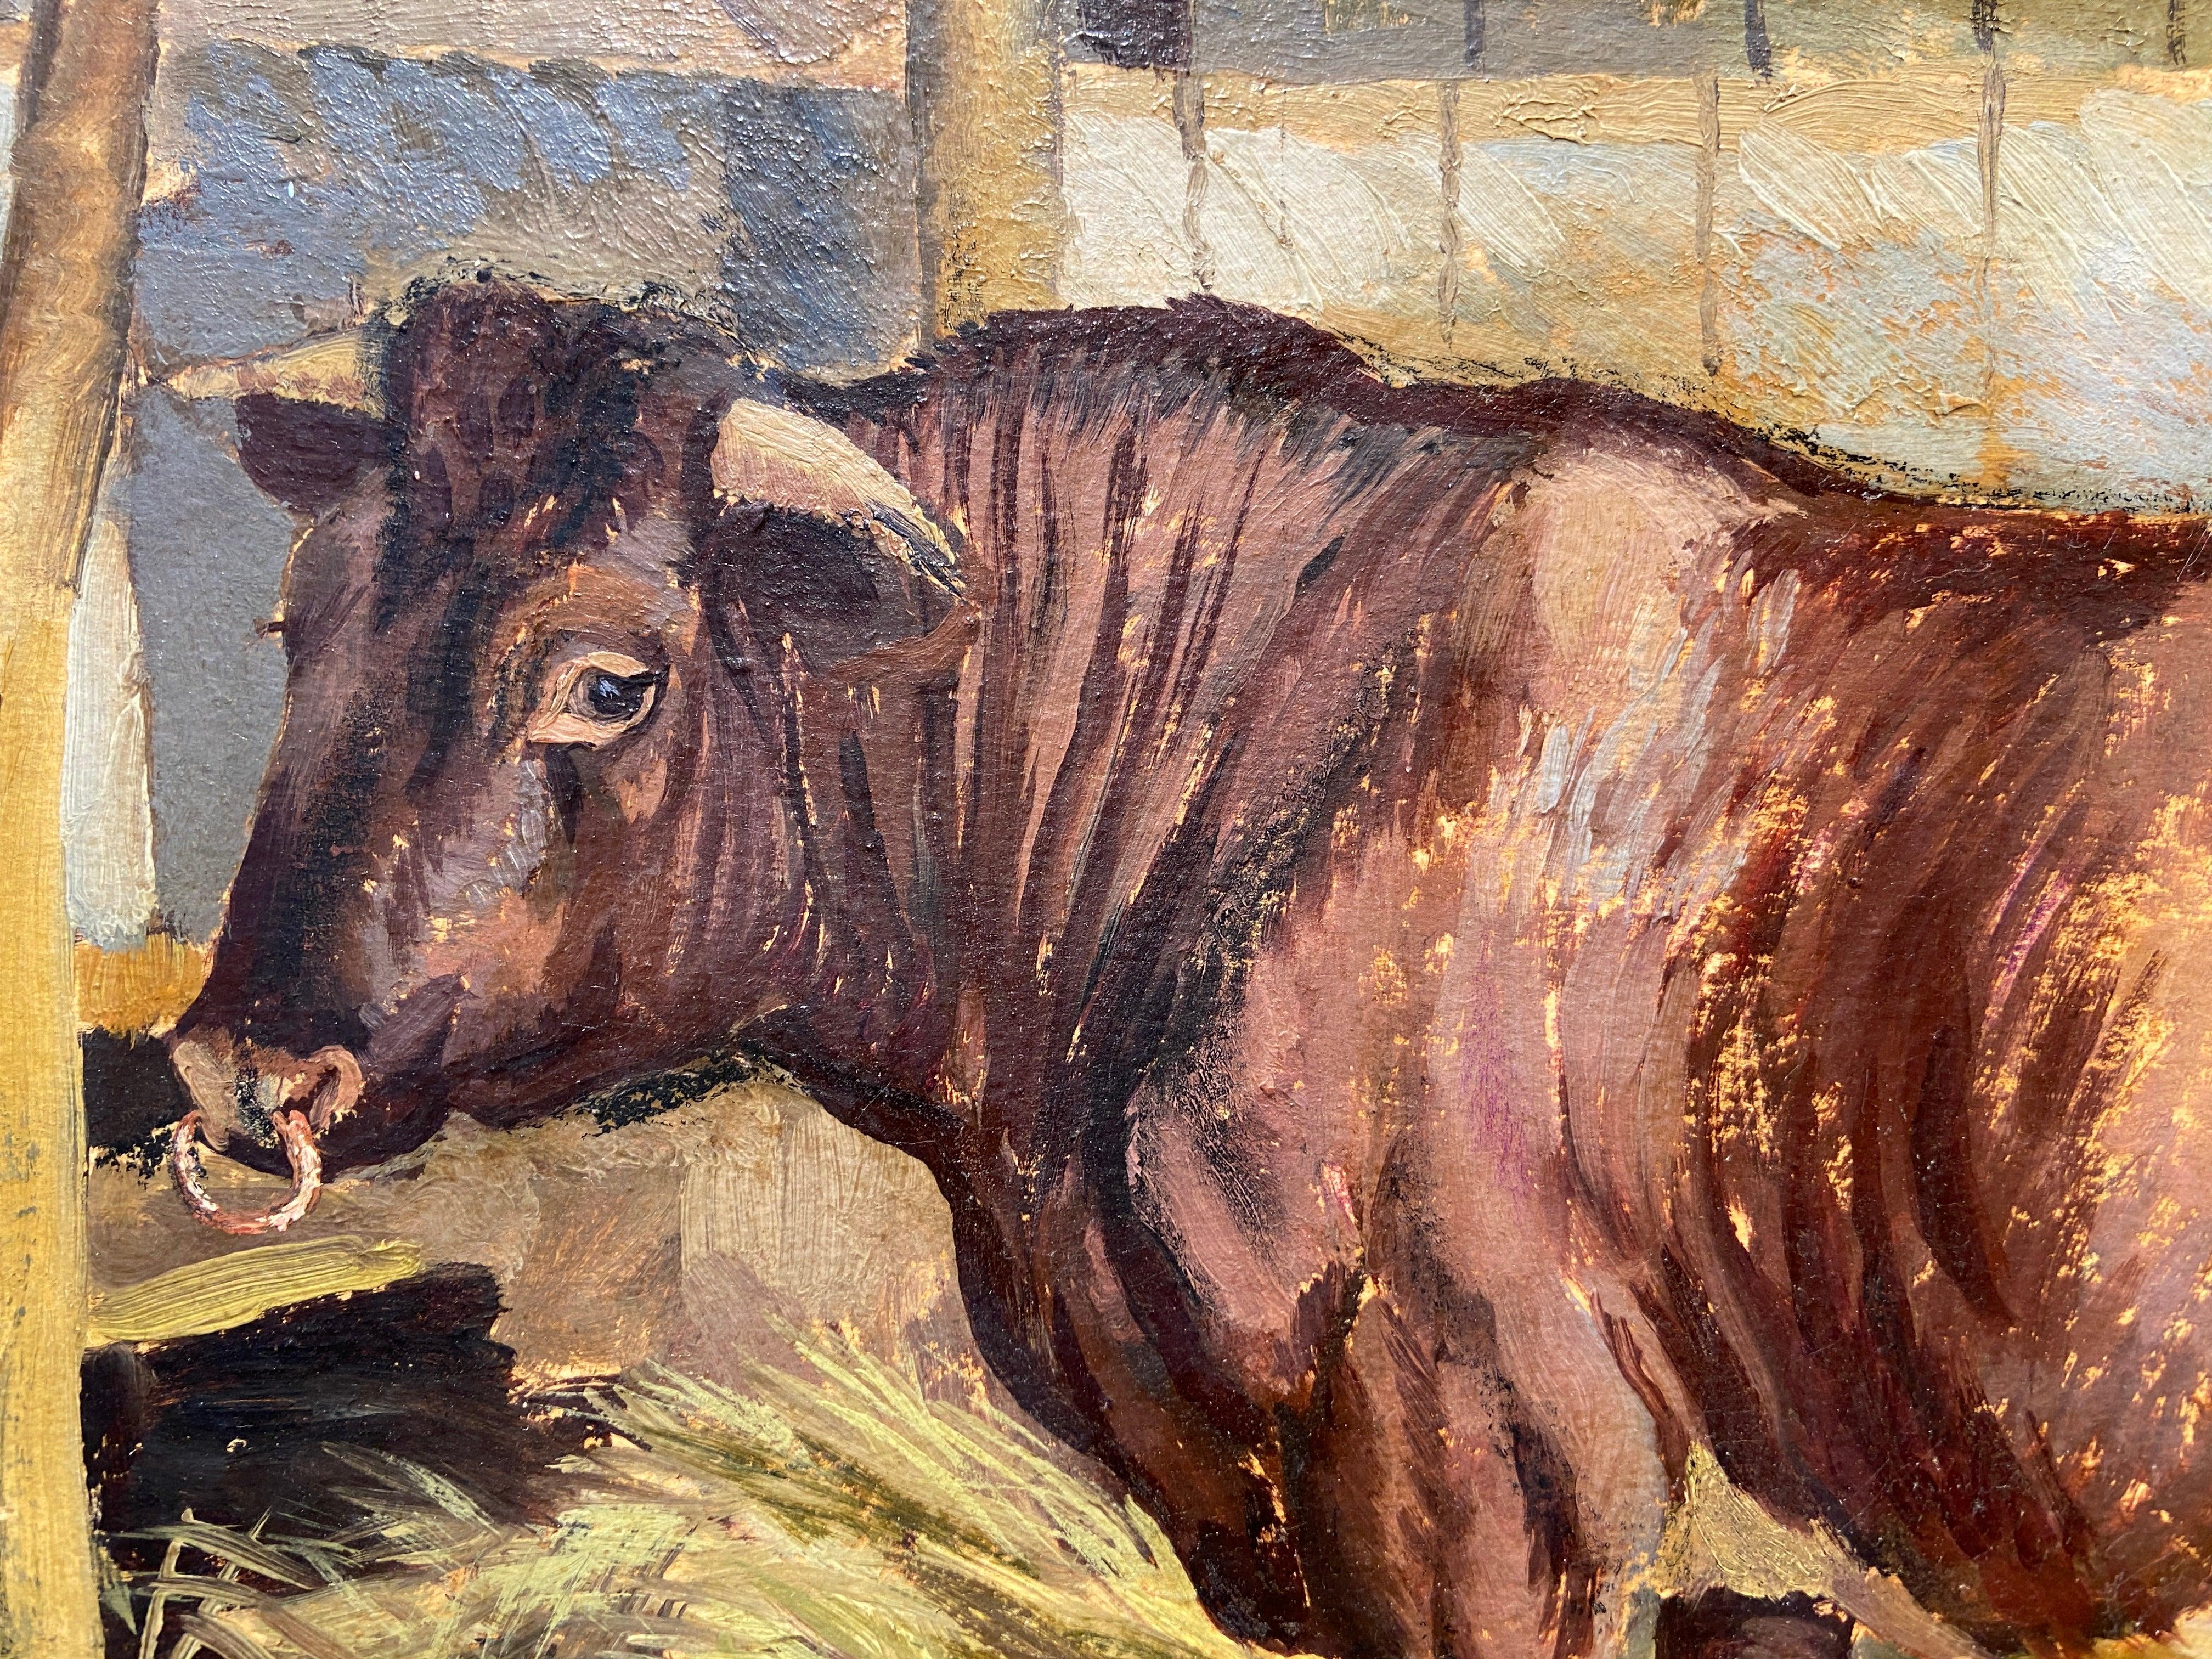 Little Bull, 20th Century Farmyard Oil Painting, Signed and Inscribed - Brown Animal Painting by Gerald Cooper